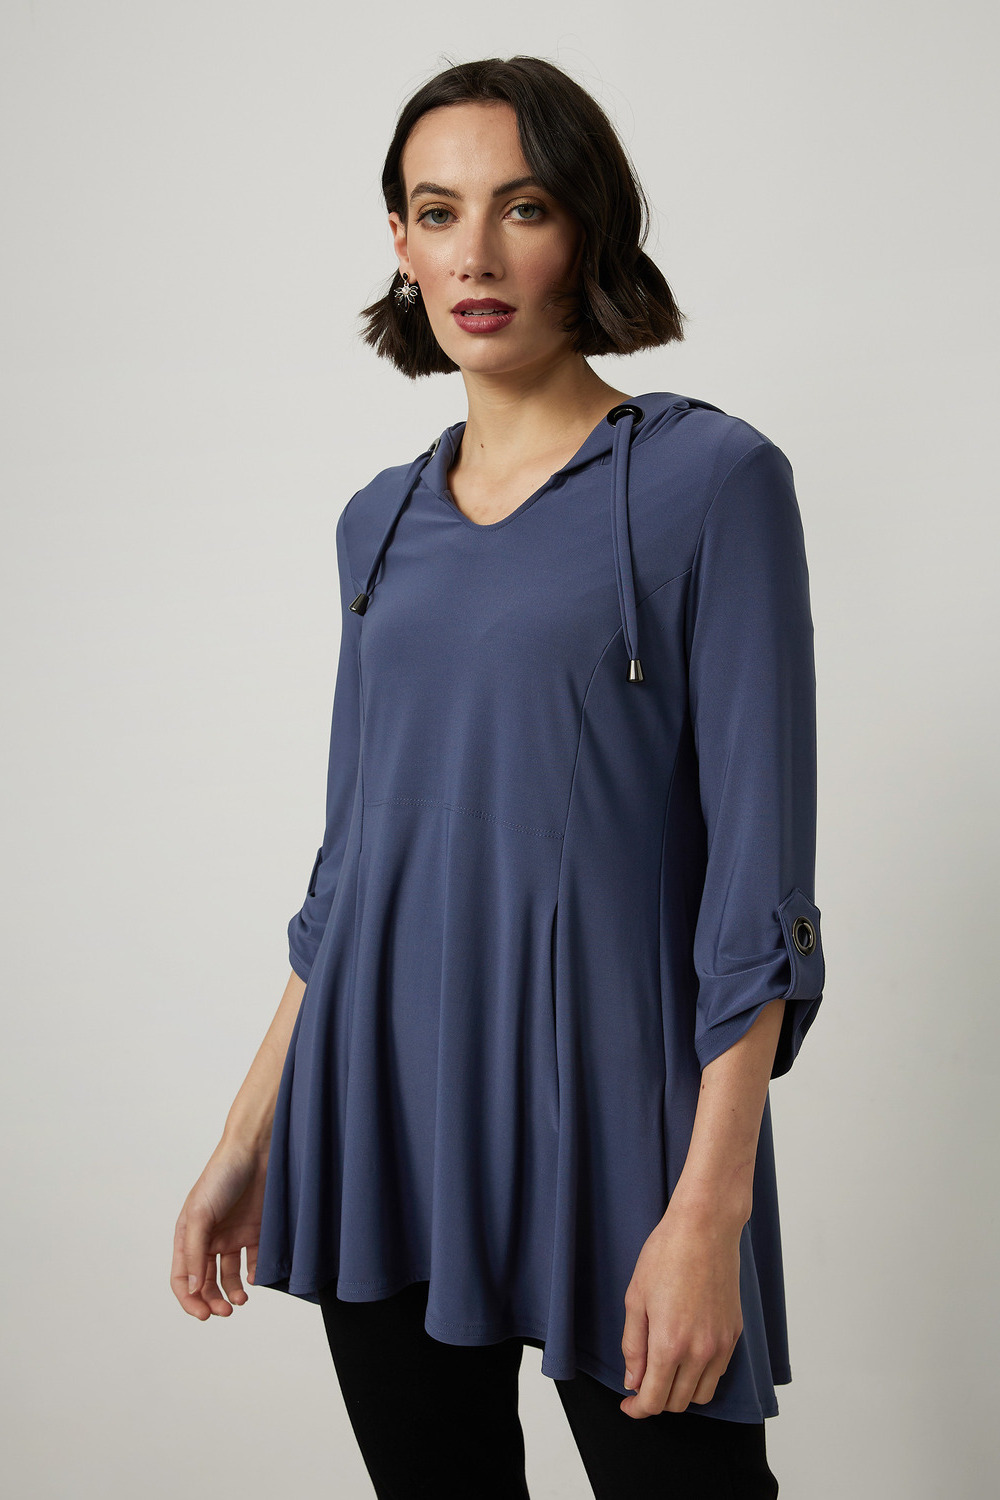 Joseph Ribkoff Eyelet Detail Hooded Top Style 214262. Mineral Blue